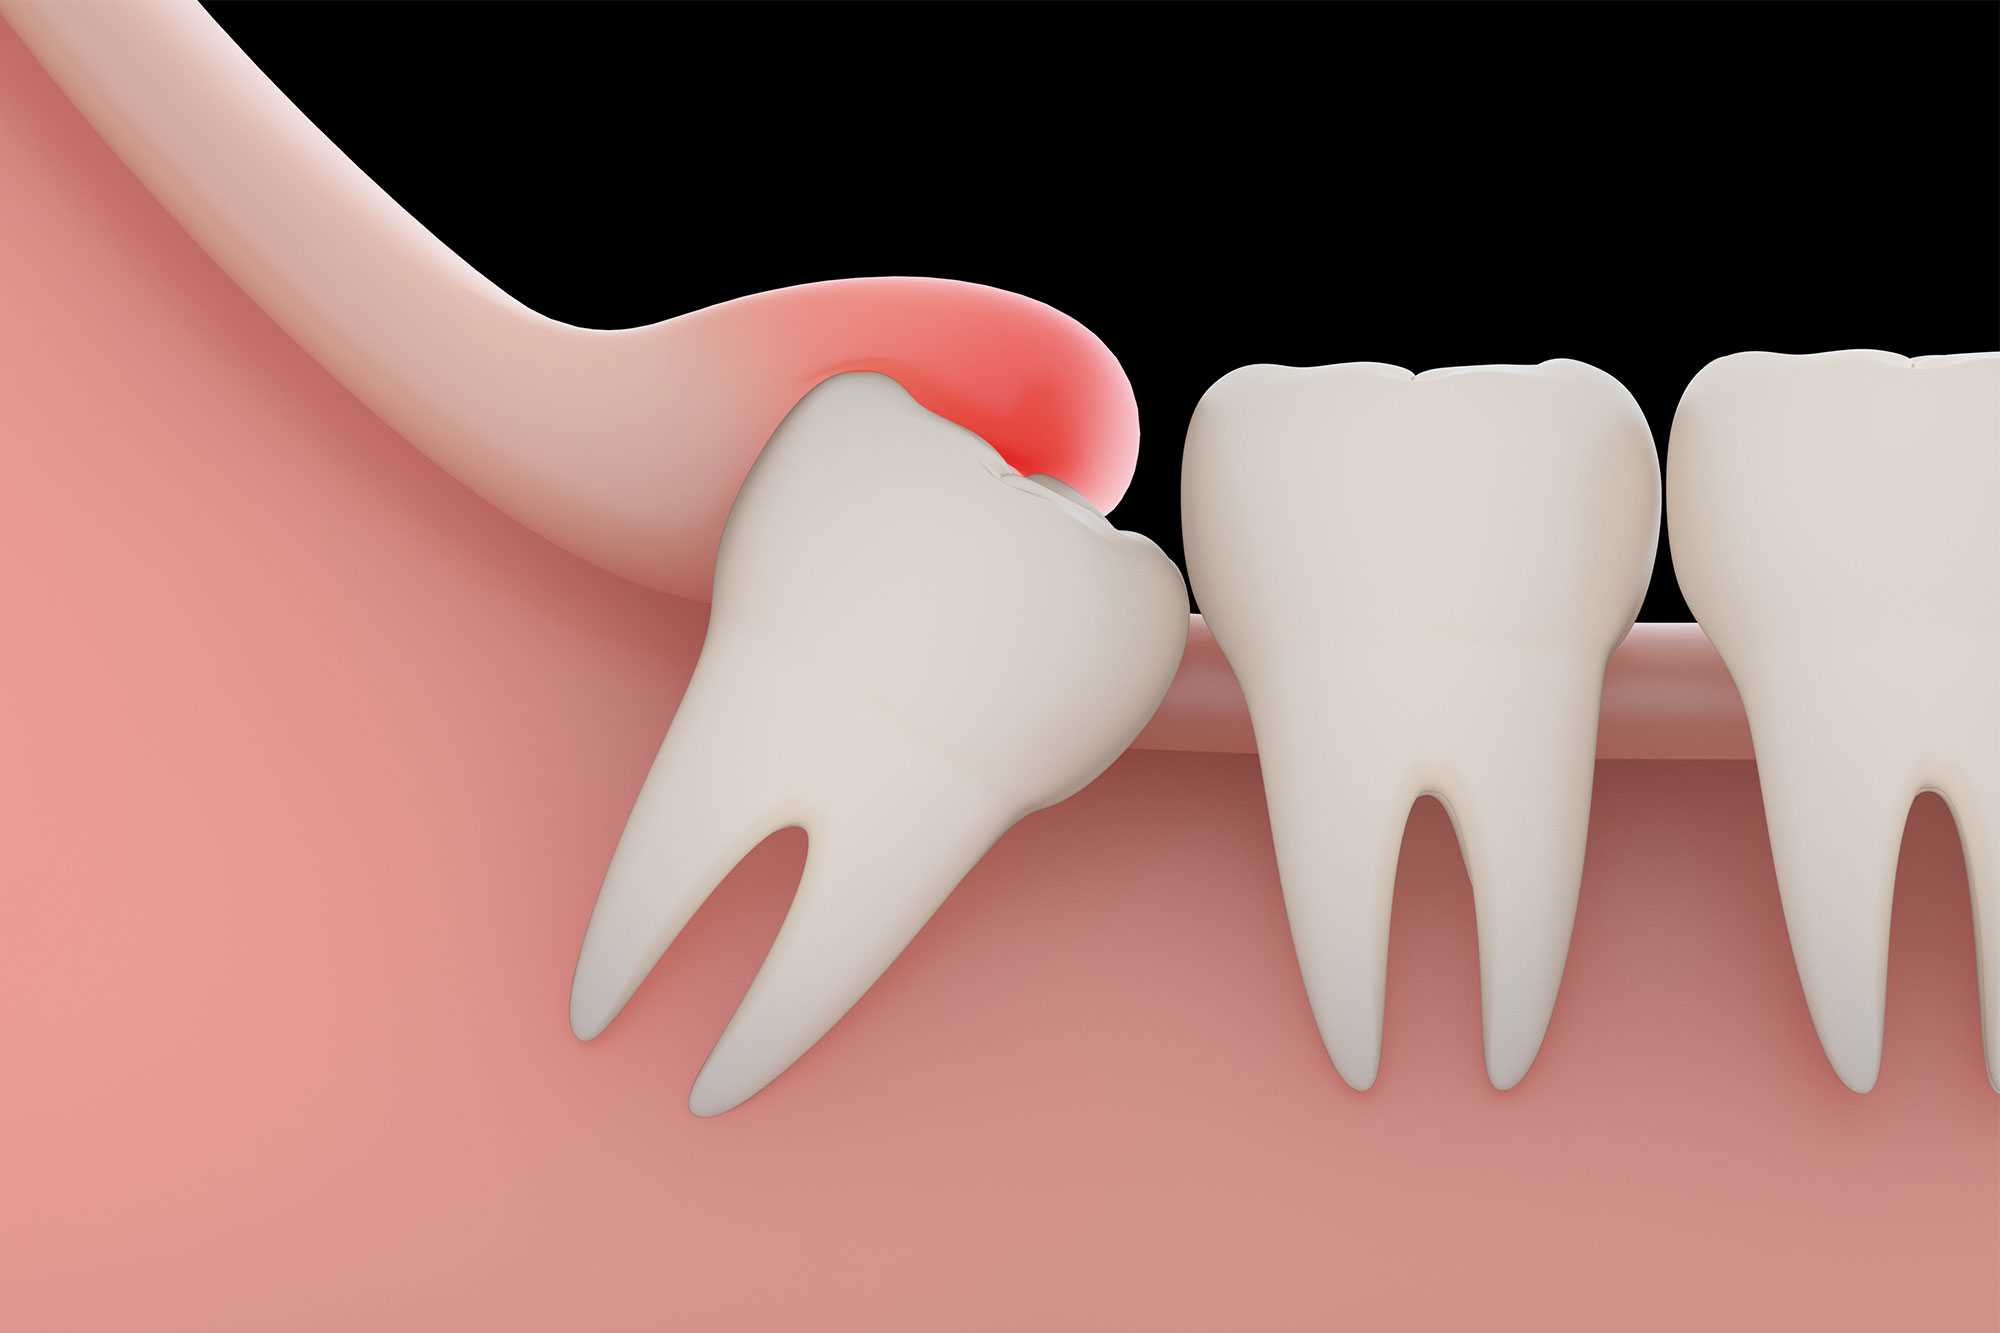 How Is Wisdom Teeth Removal Performed And What Is The Recovery Process Like?